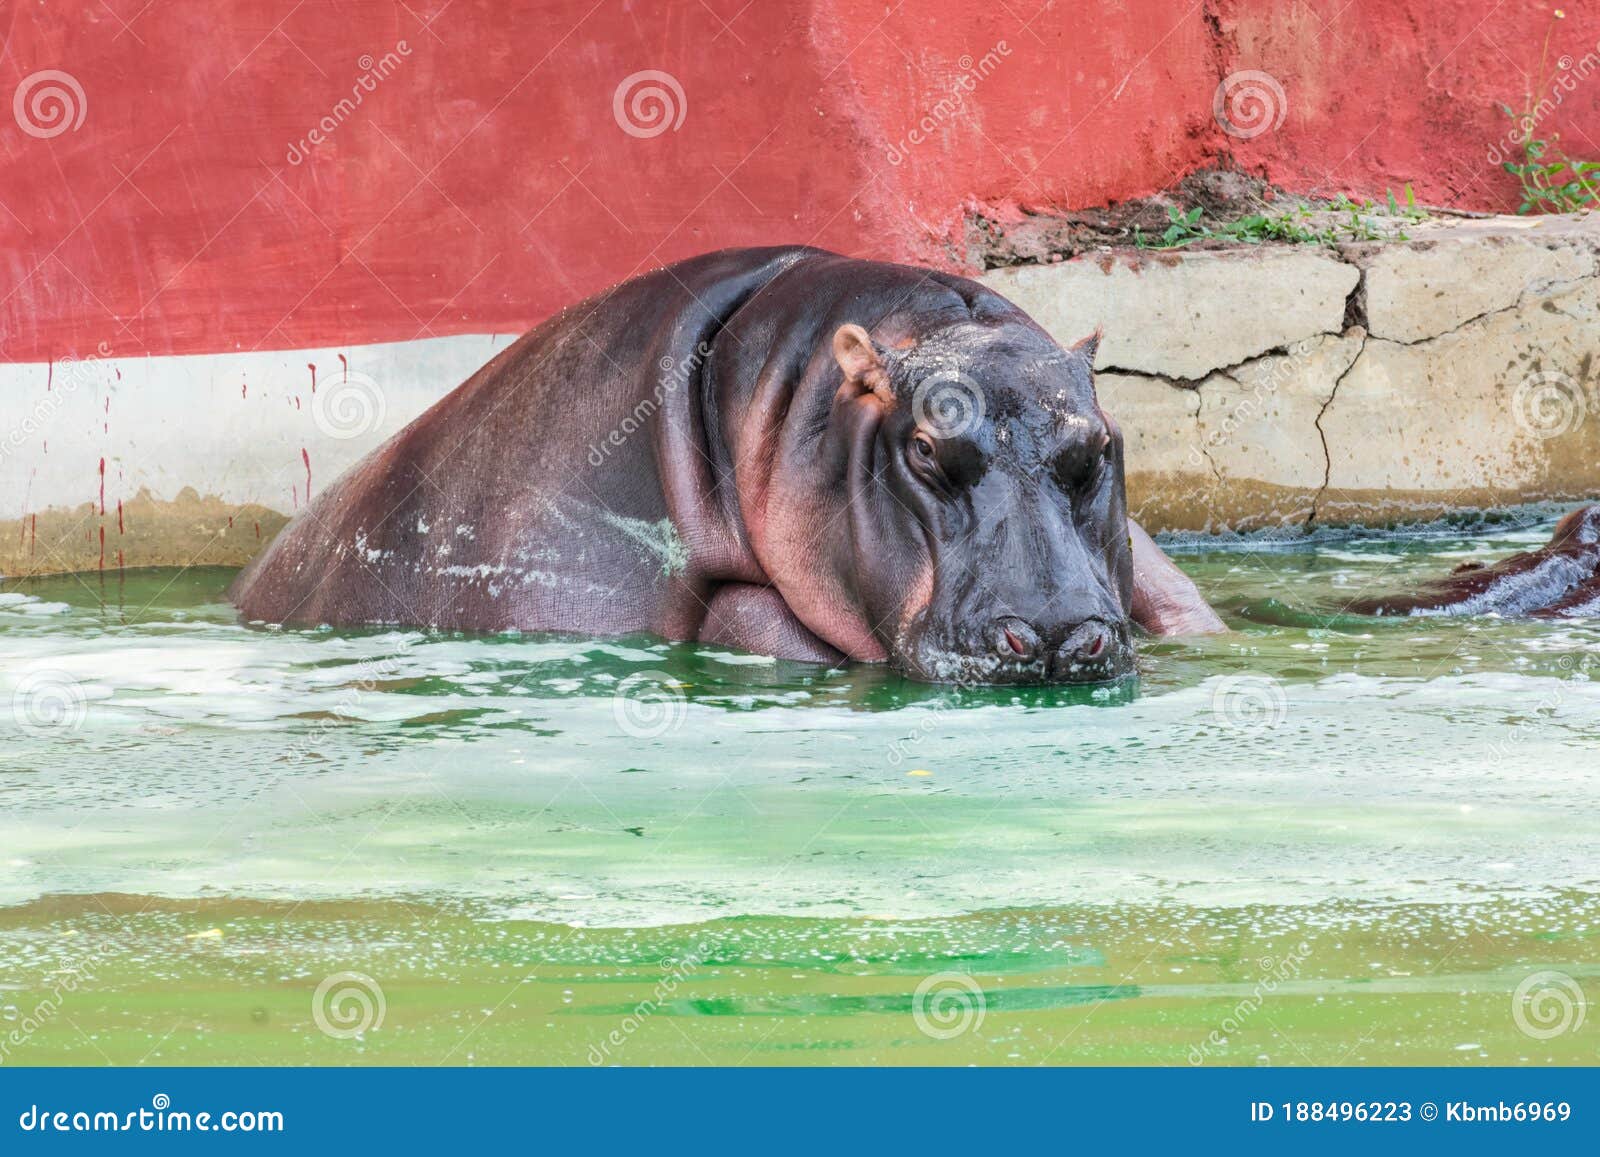 Wild Animal Hippopotamus Bathing in an Indian National Park Pond. Stock  Image - Image of face, national: 188496223